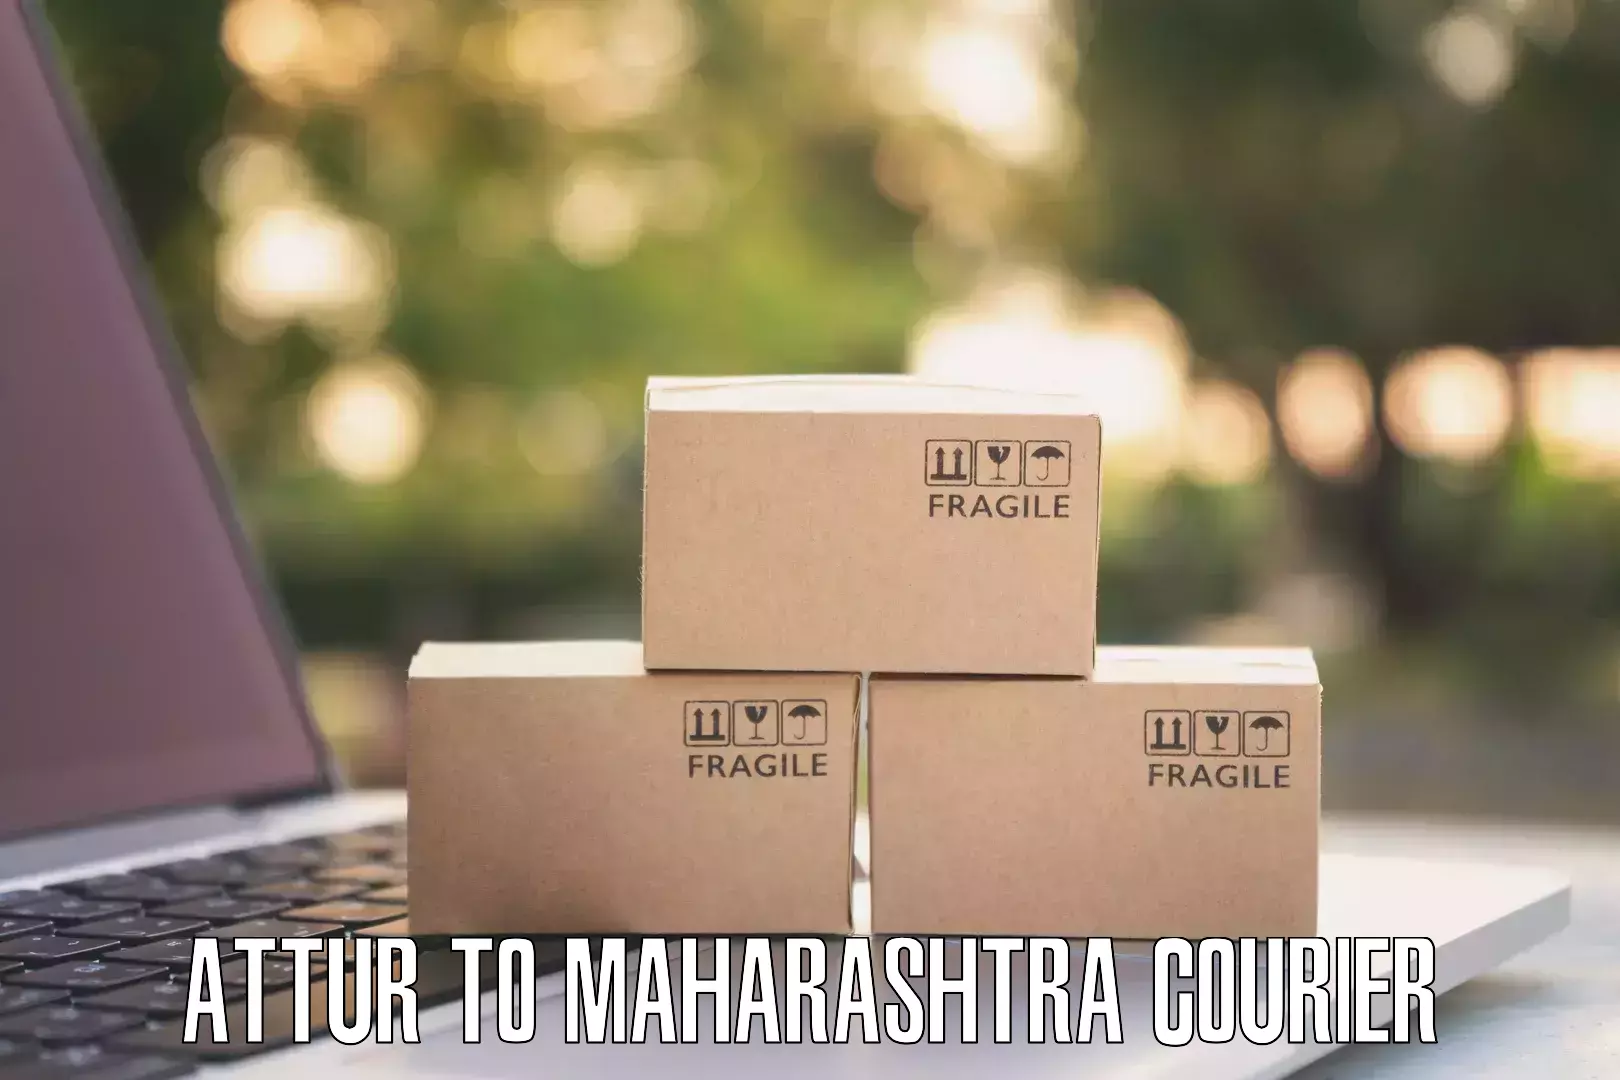 Customer-oriented courier services Attur to Shirdi